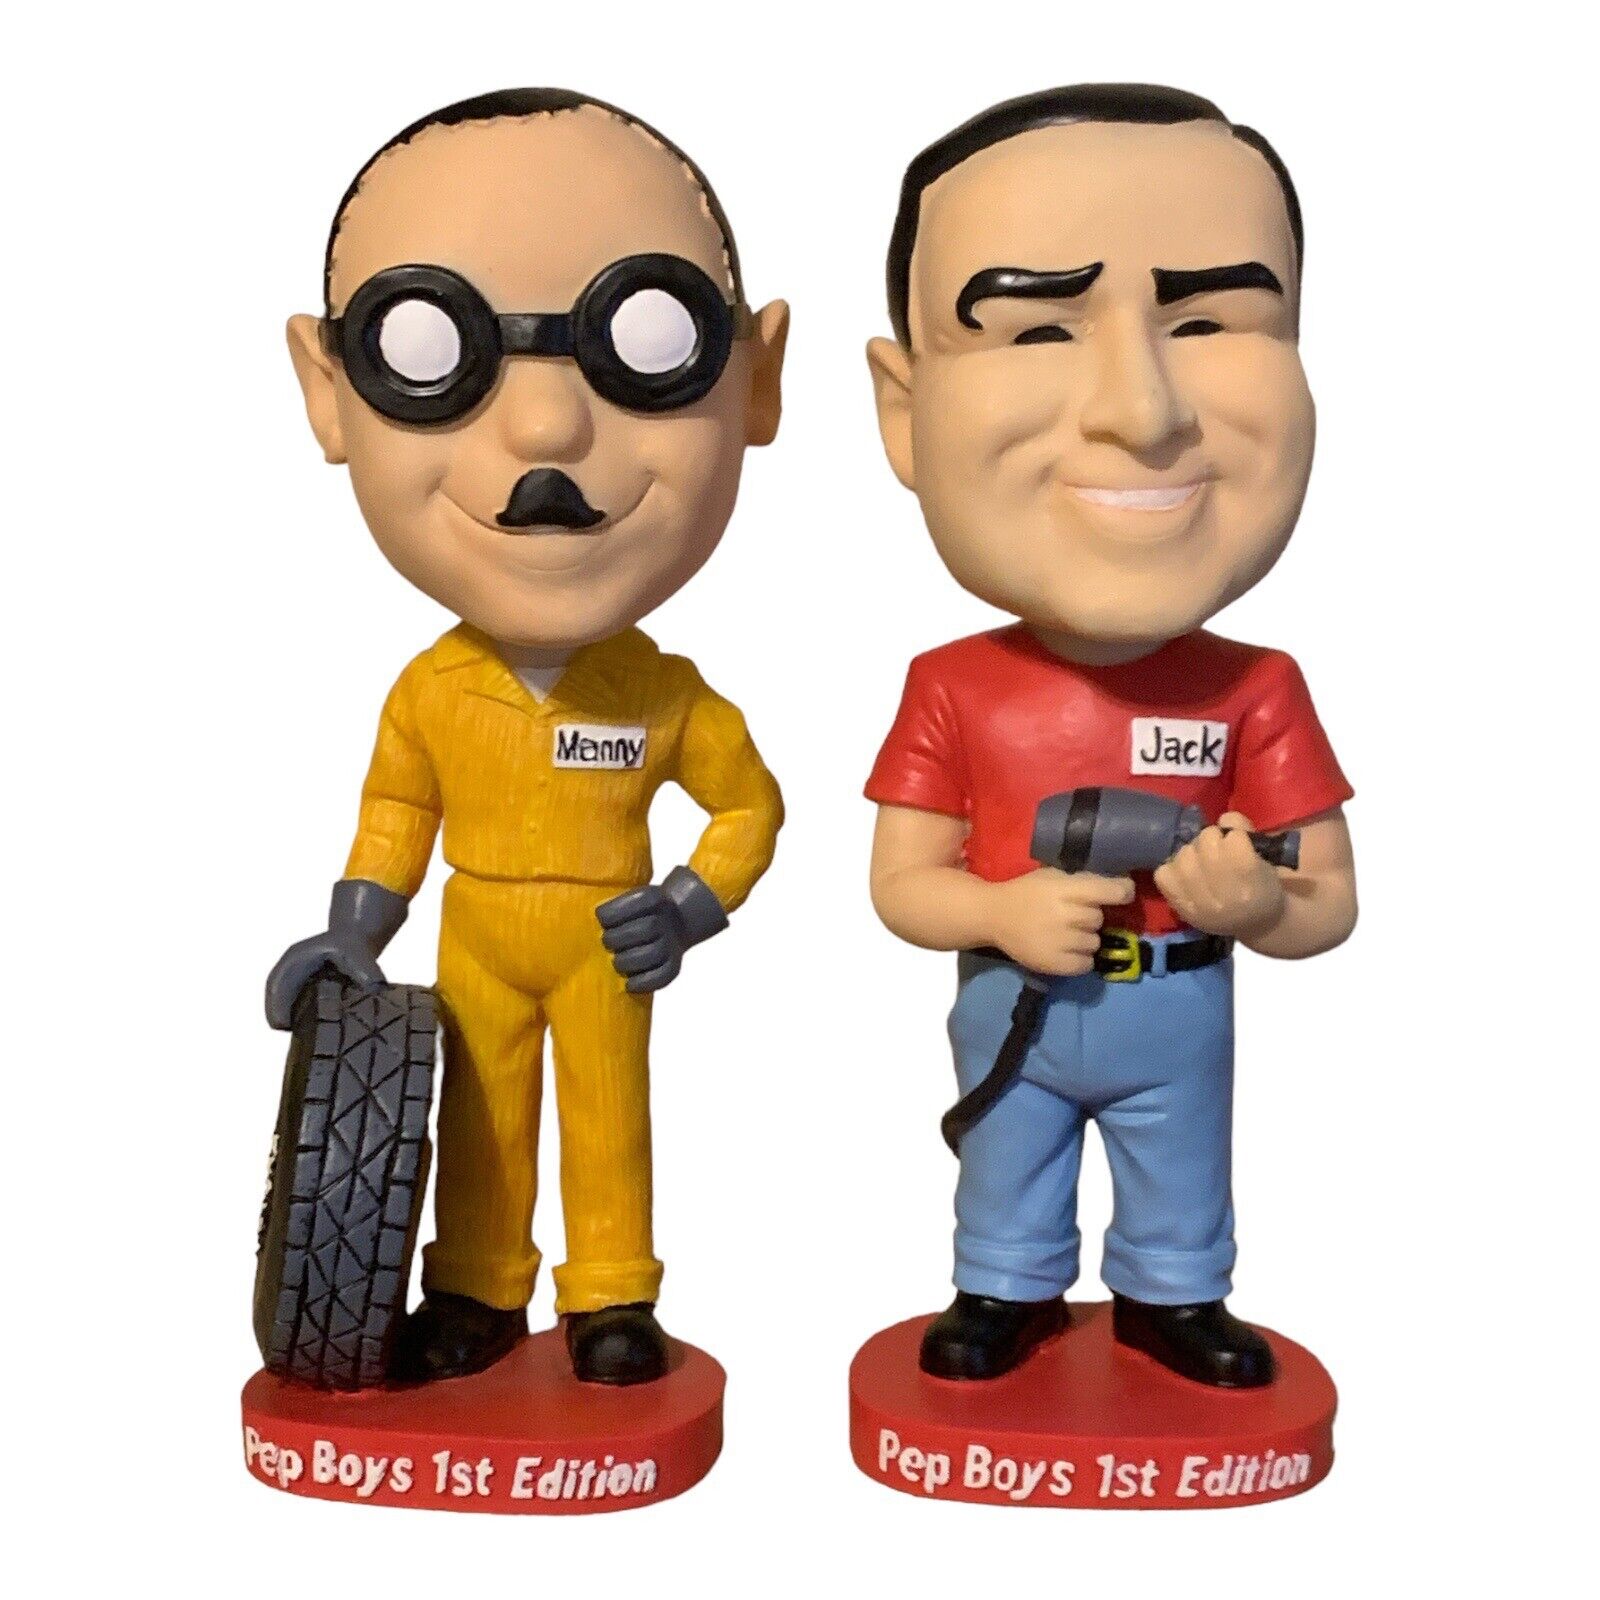 Pep Boys Bobbleheads Manny & Jack 1st Editions In Original Boxes